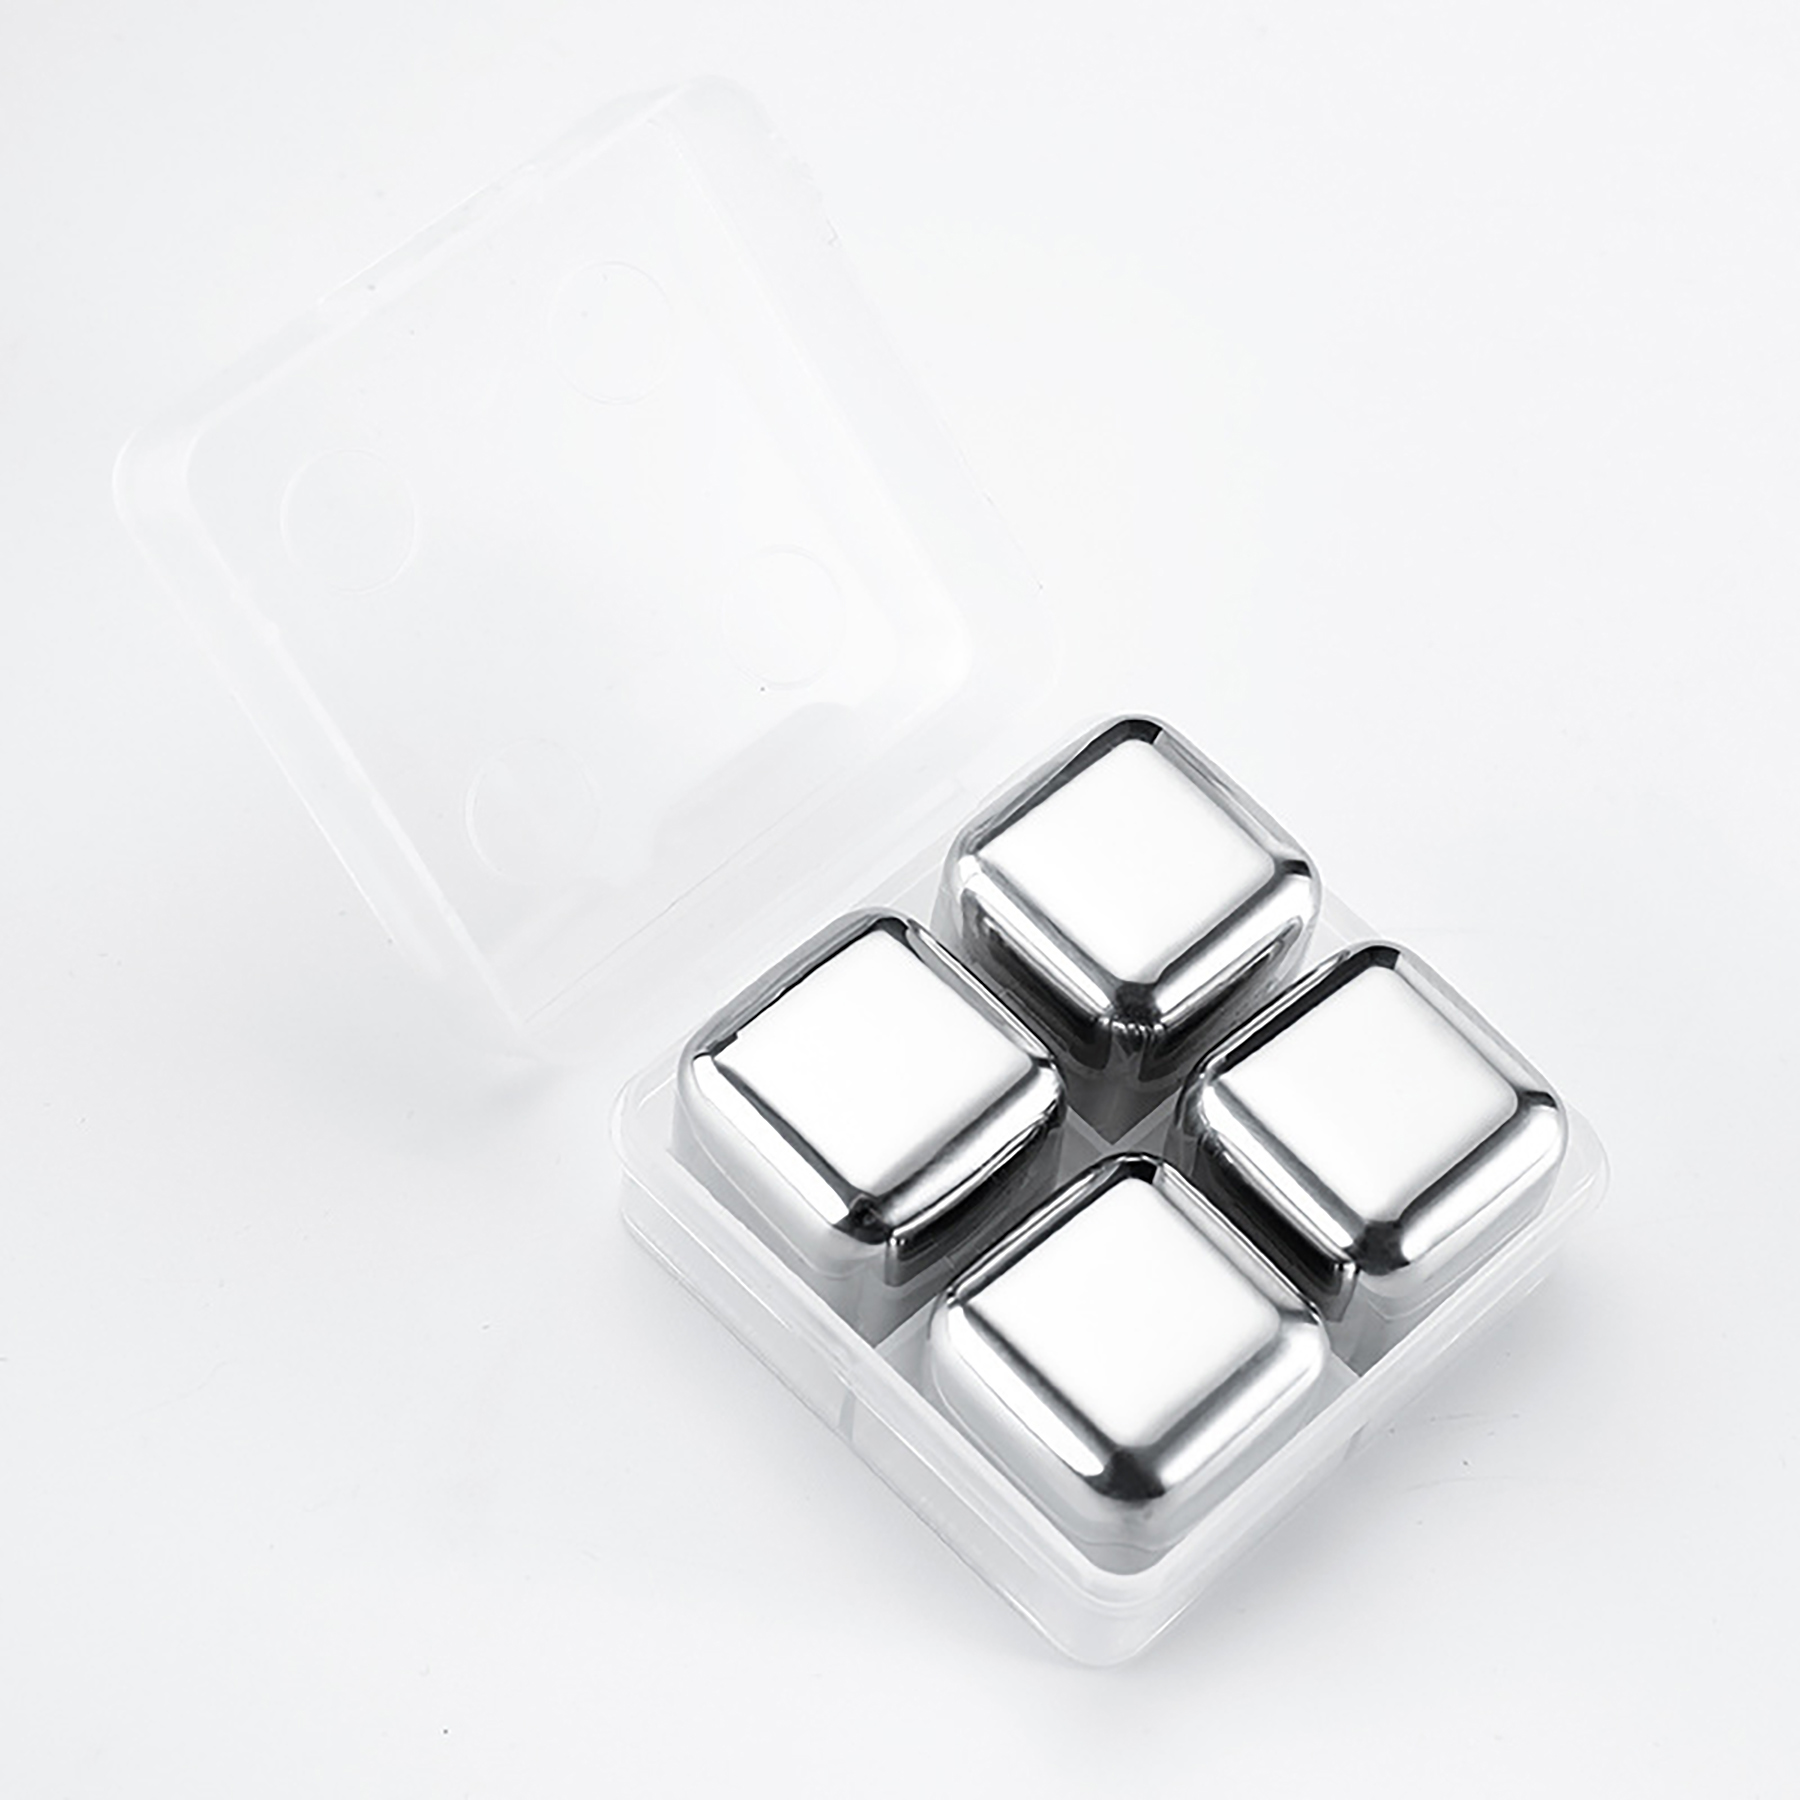 Reusable Stainless Steel Ice Cubes w/ Box